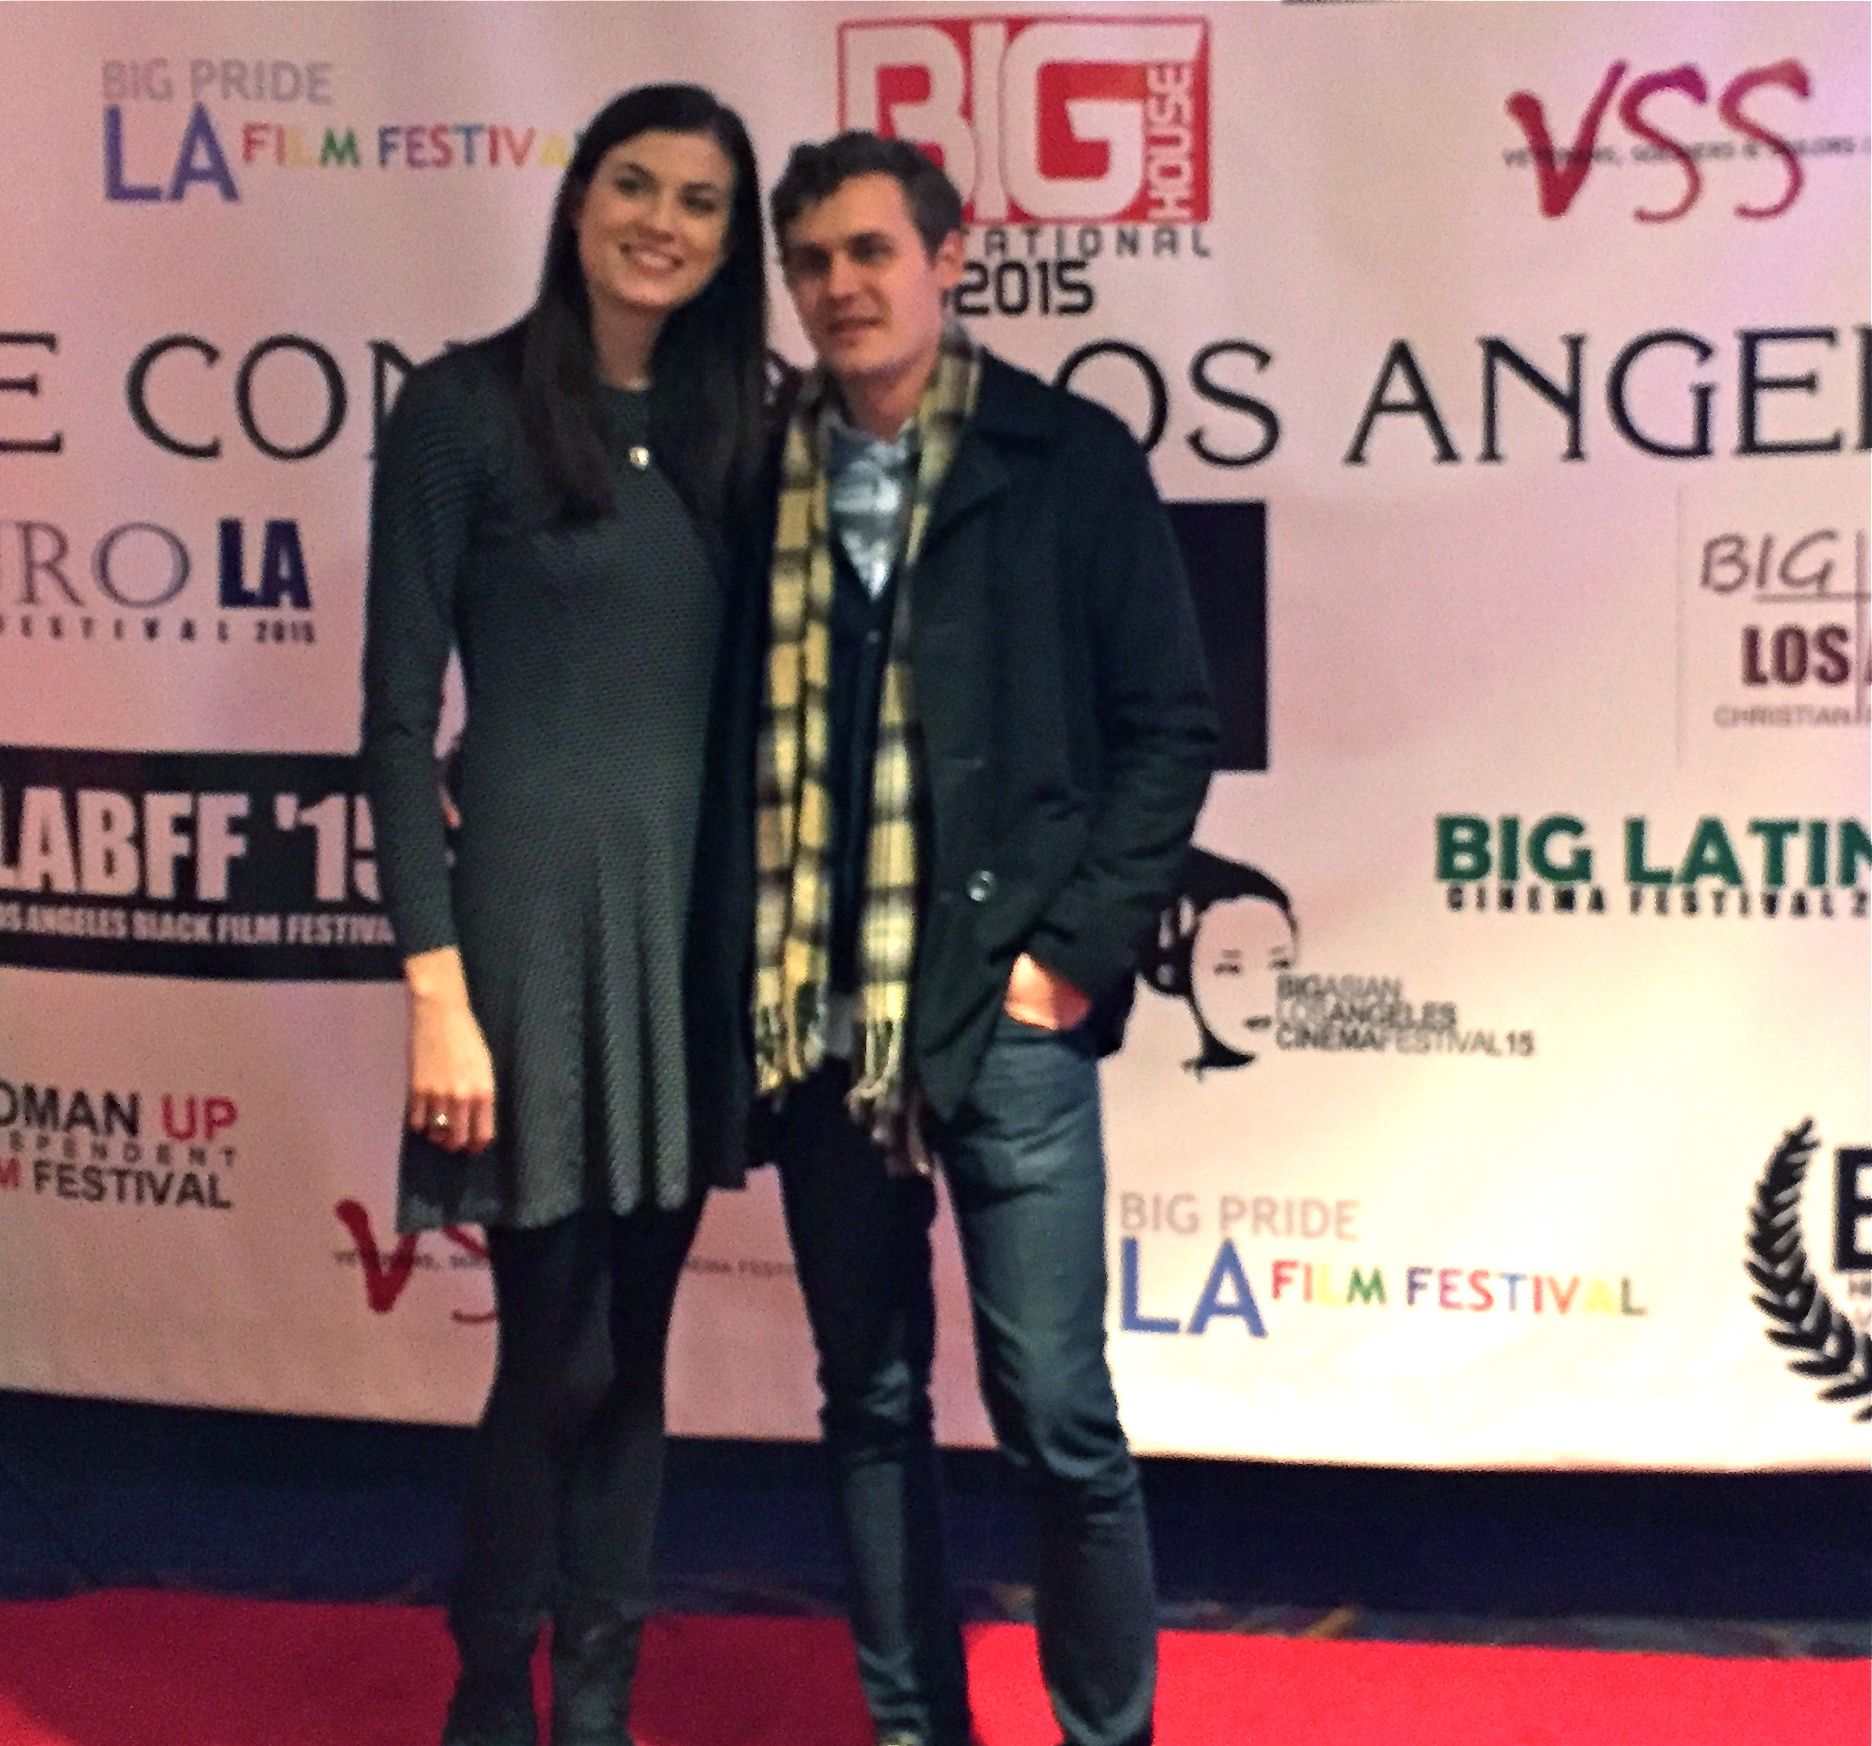 Producers of The River Bride at International Film Festival, Los Angeles 2015